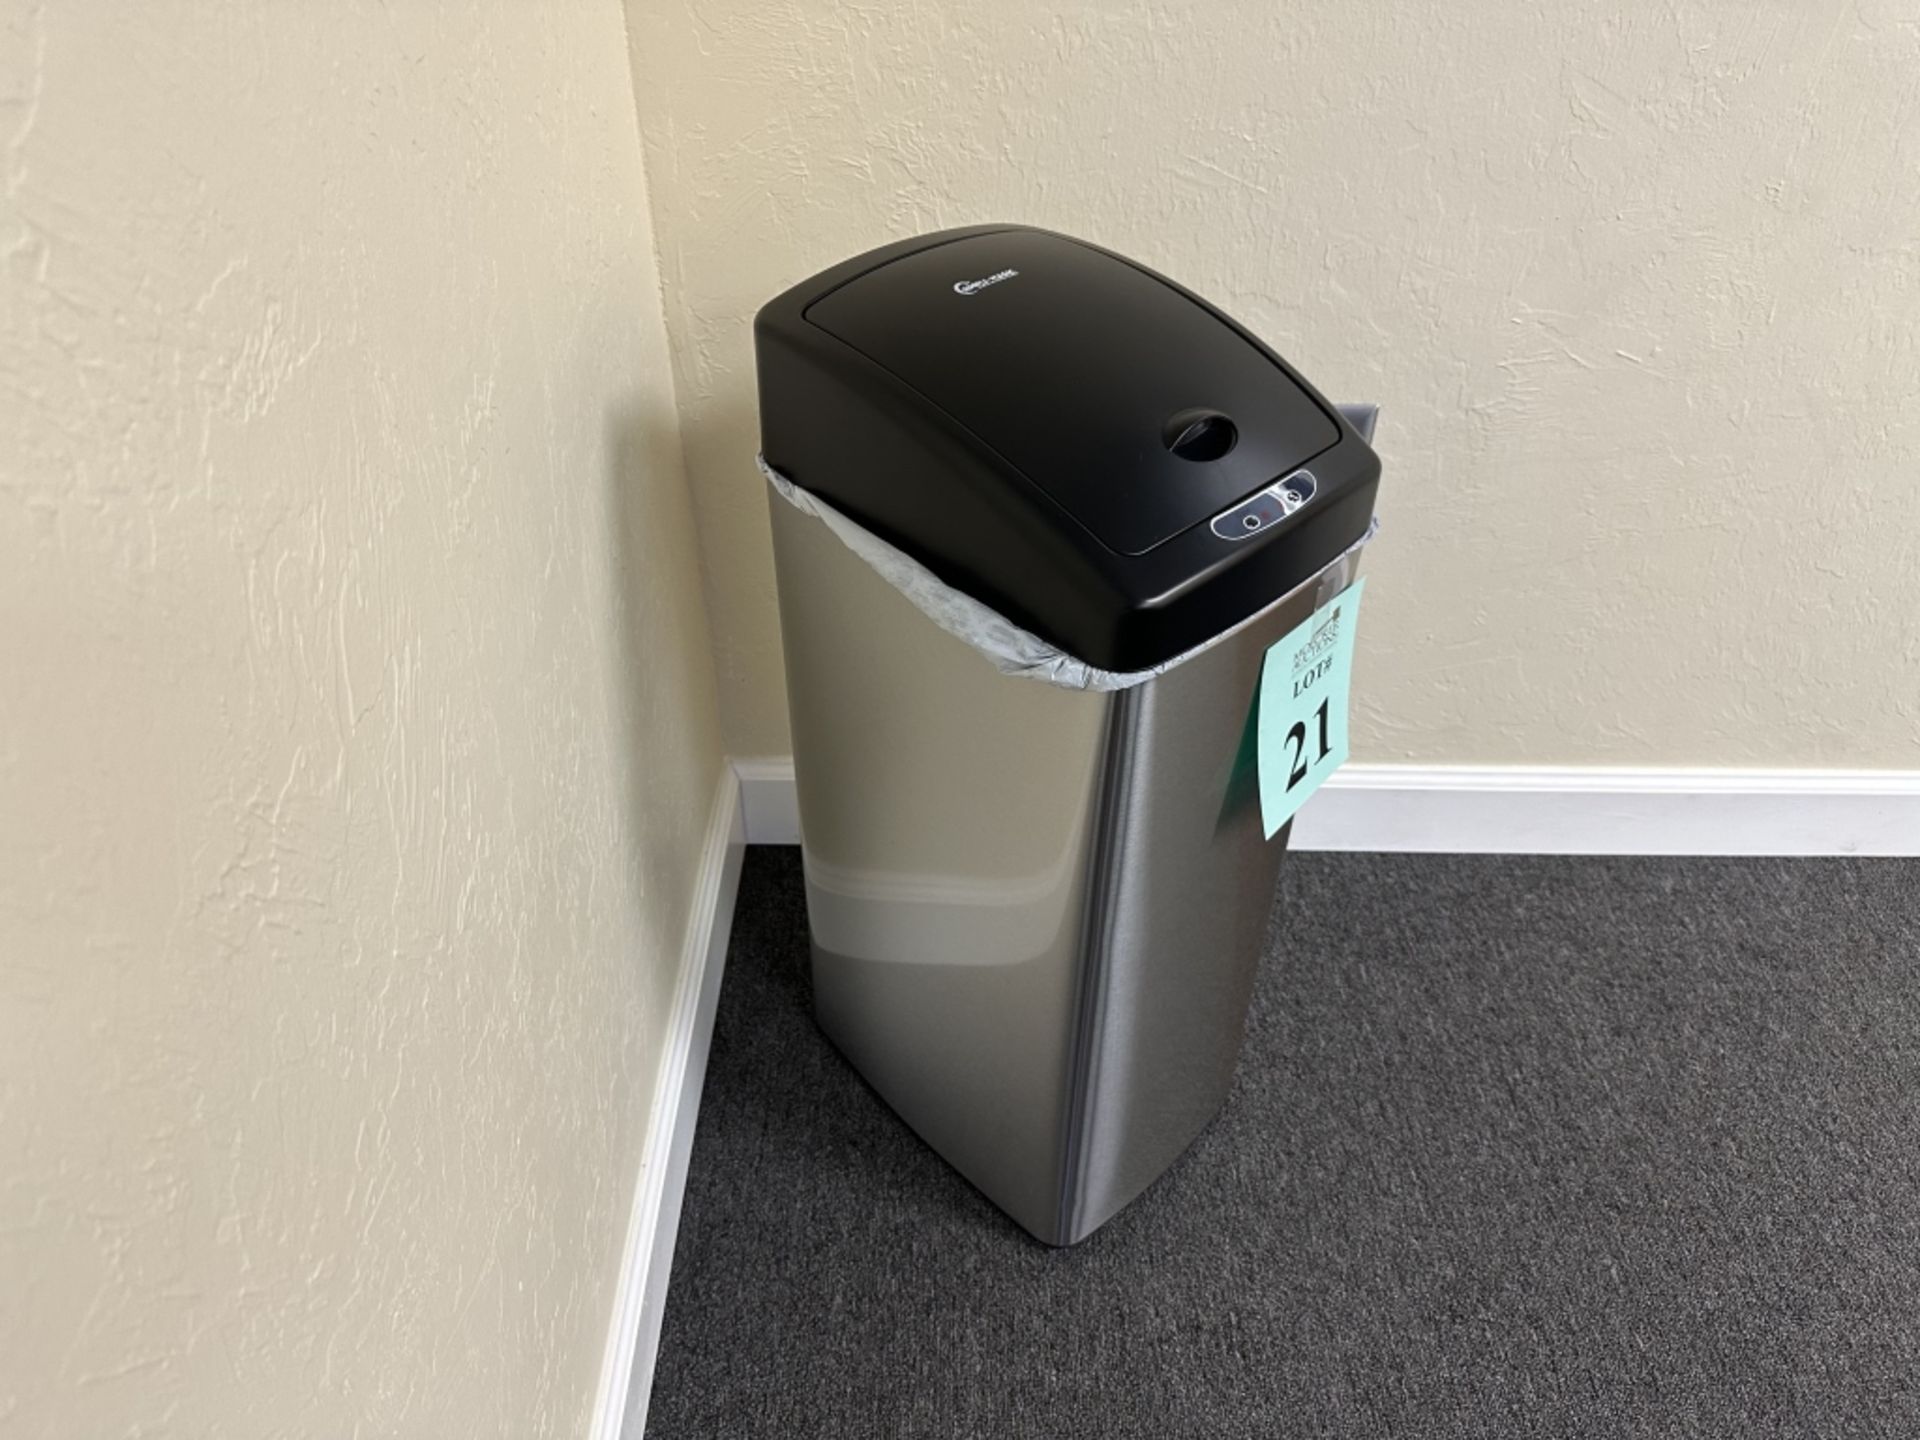 SIMPLI-MAGIC STAINLESS STEEL AUTOMATIC TRASH CAN - Image 2 of 3